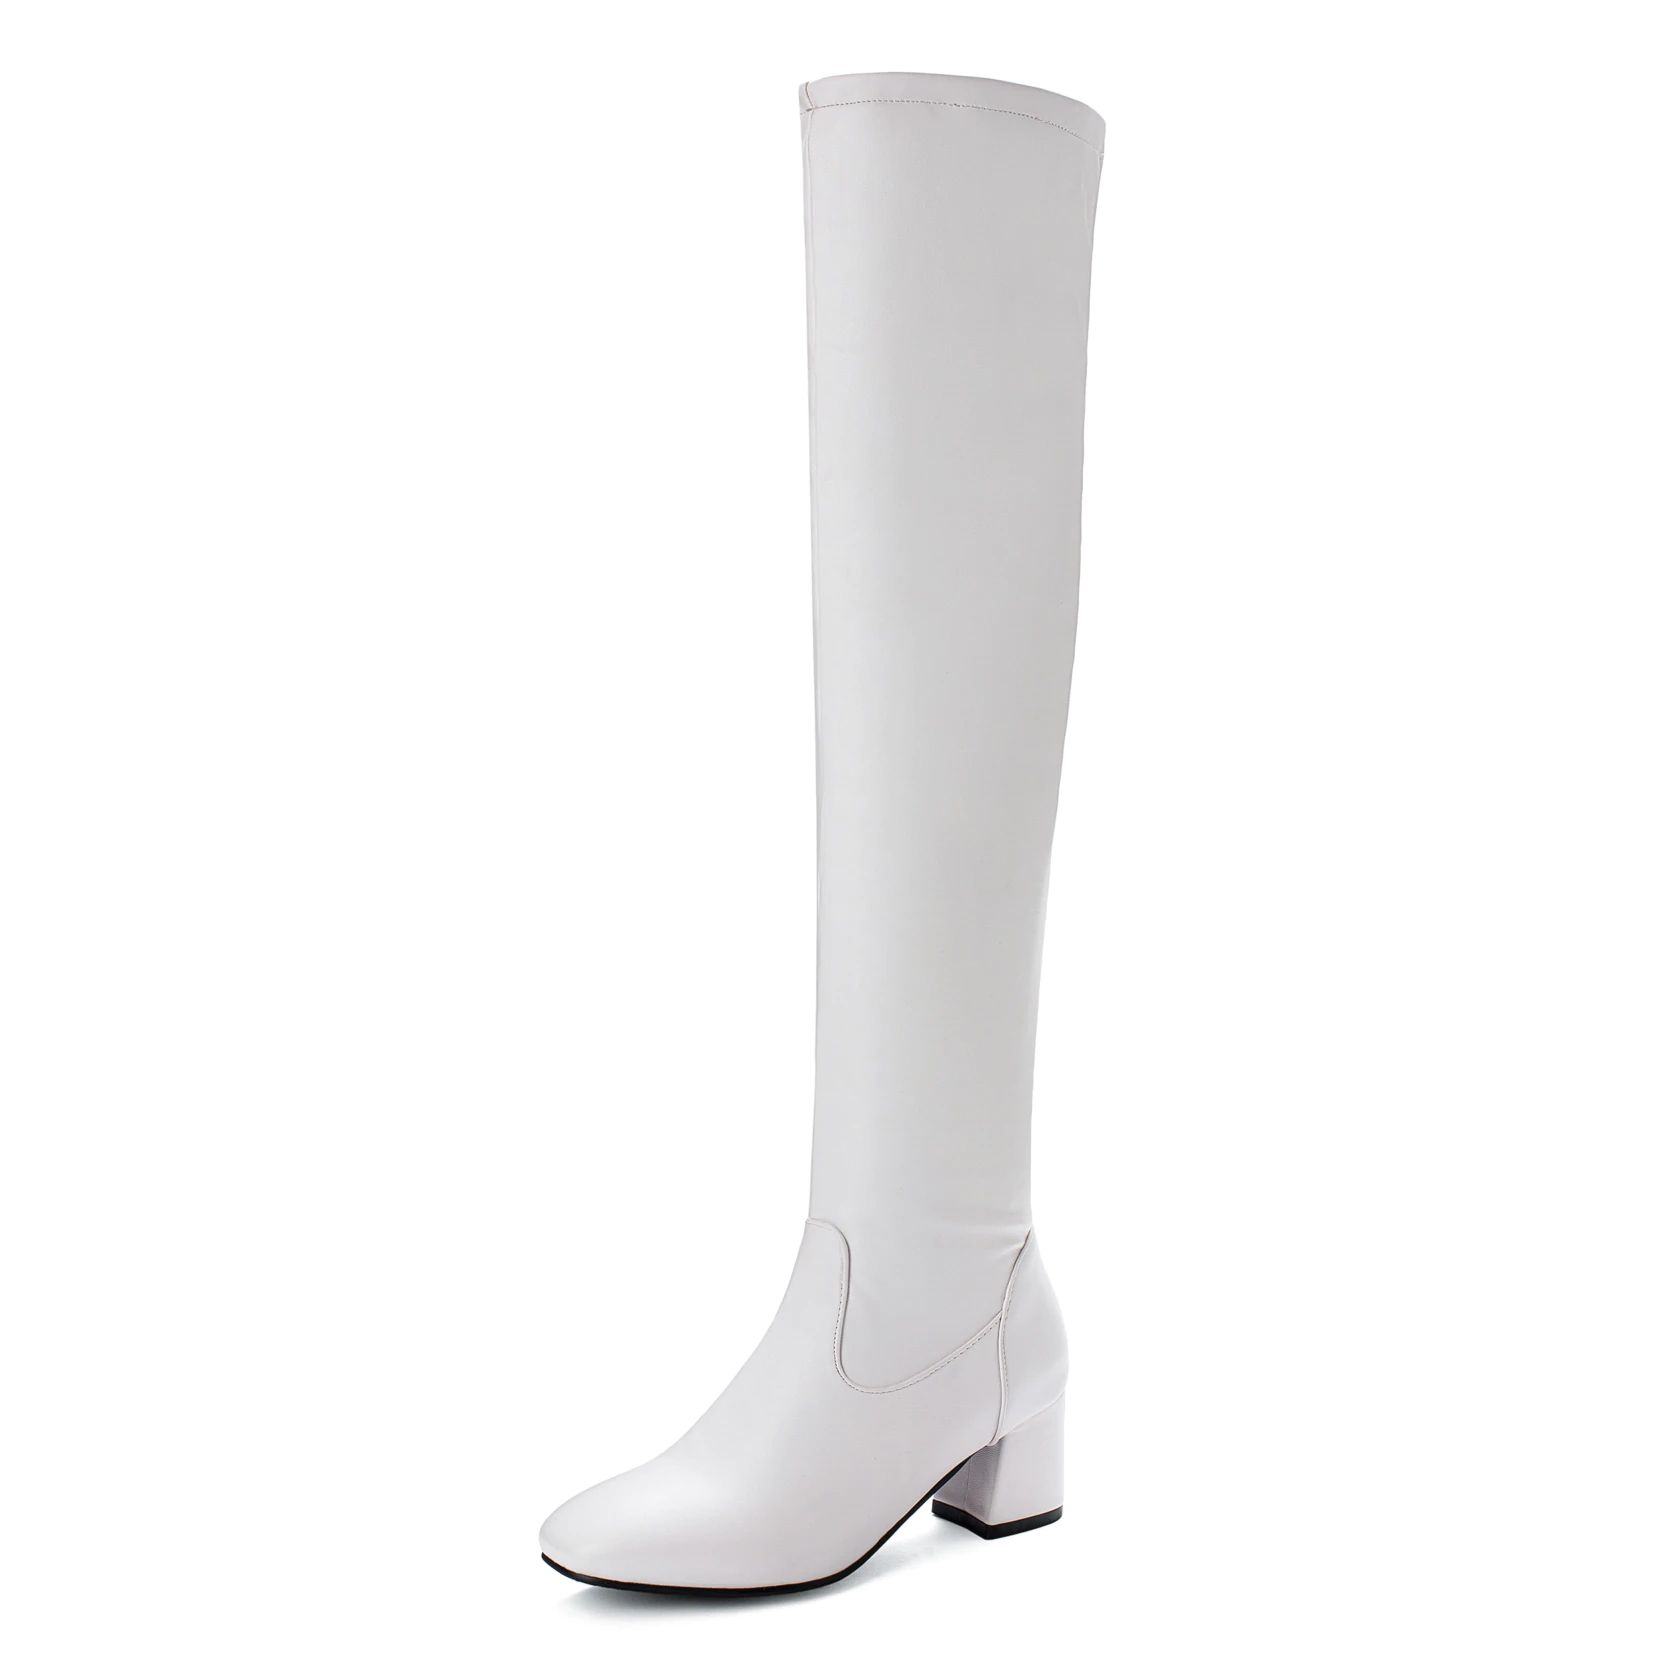 Fashion Knee High Boots Women Winter Boots Square ...